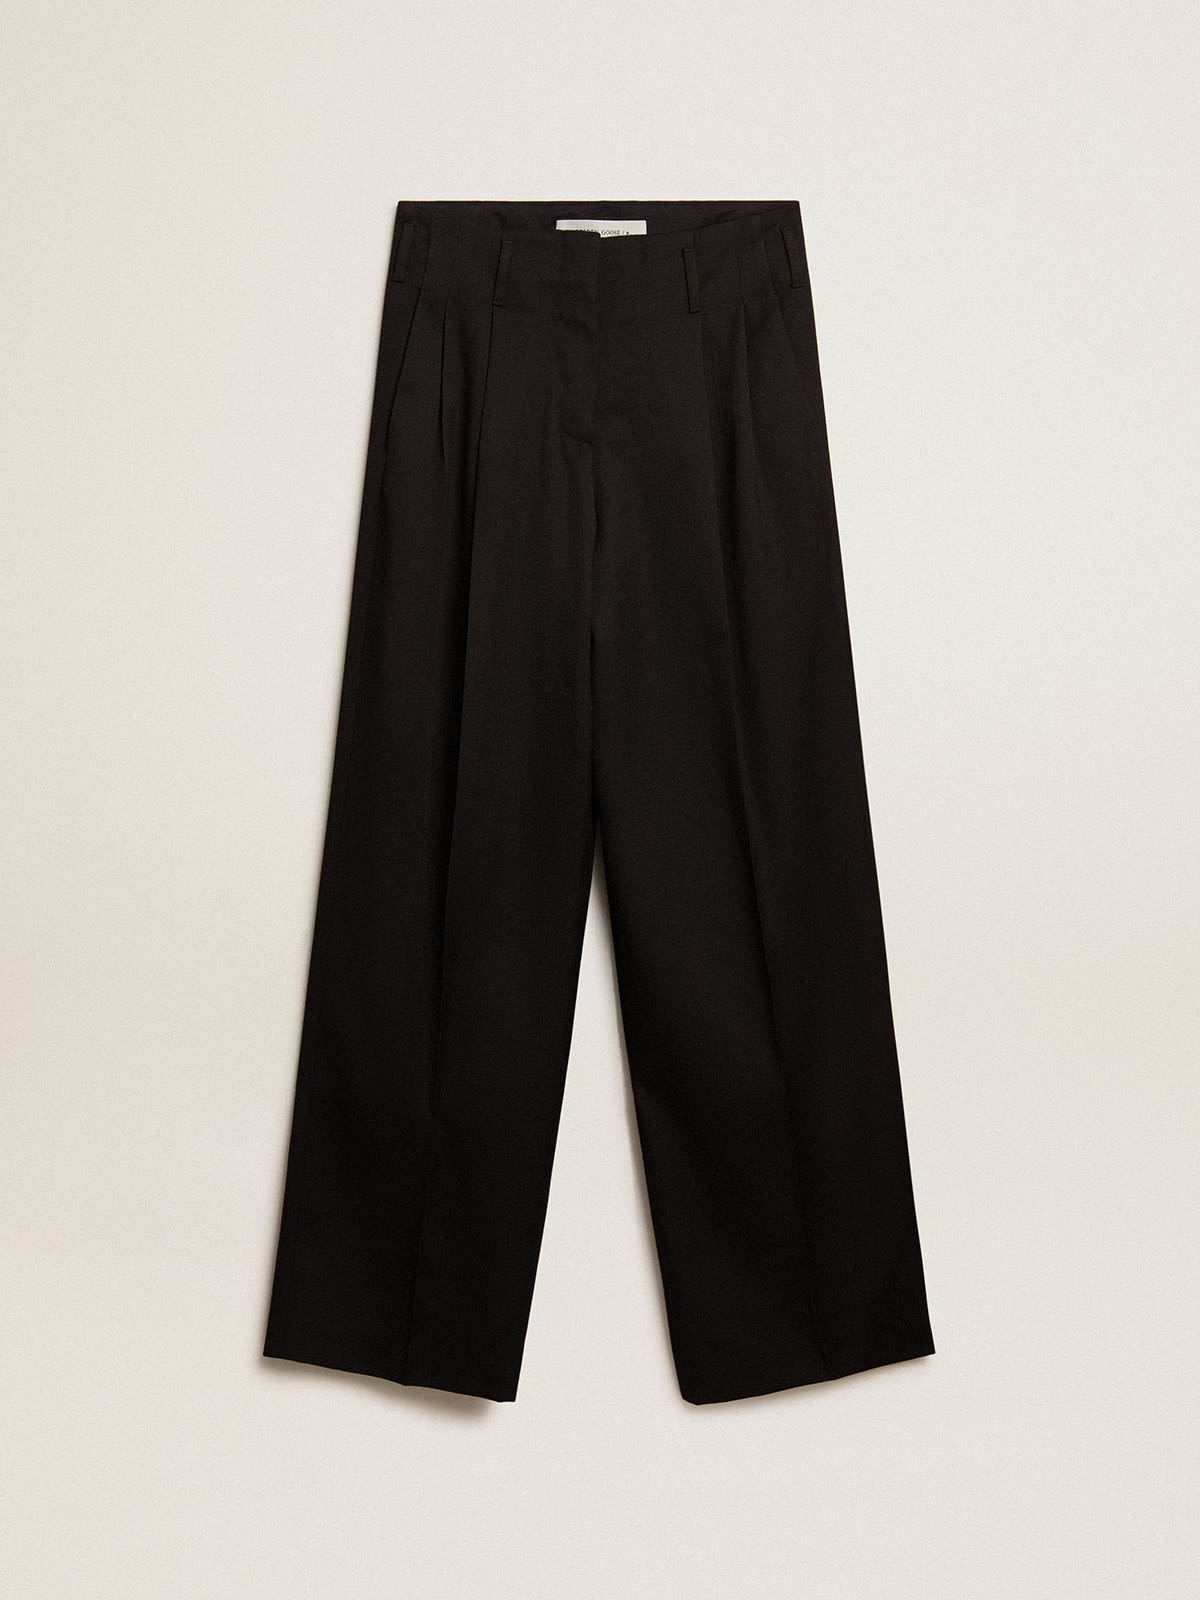 Women's trousers: pants and jeans for womens